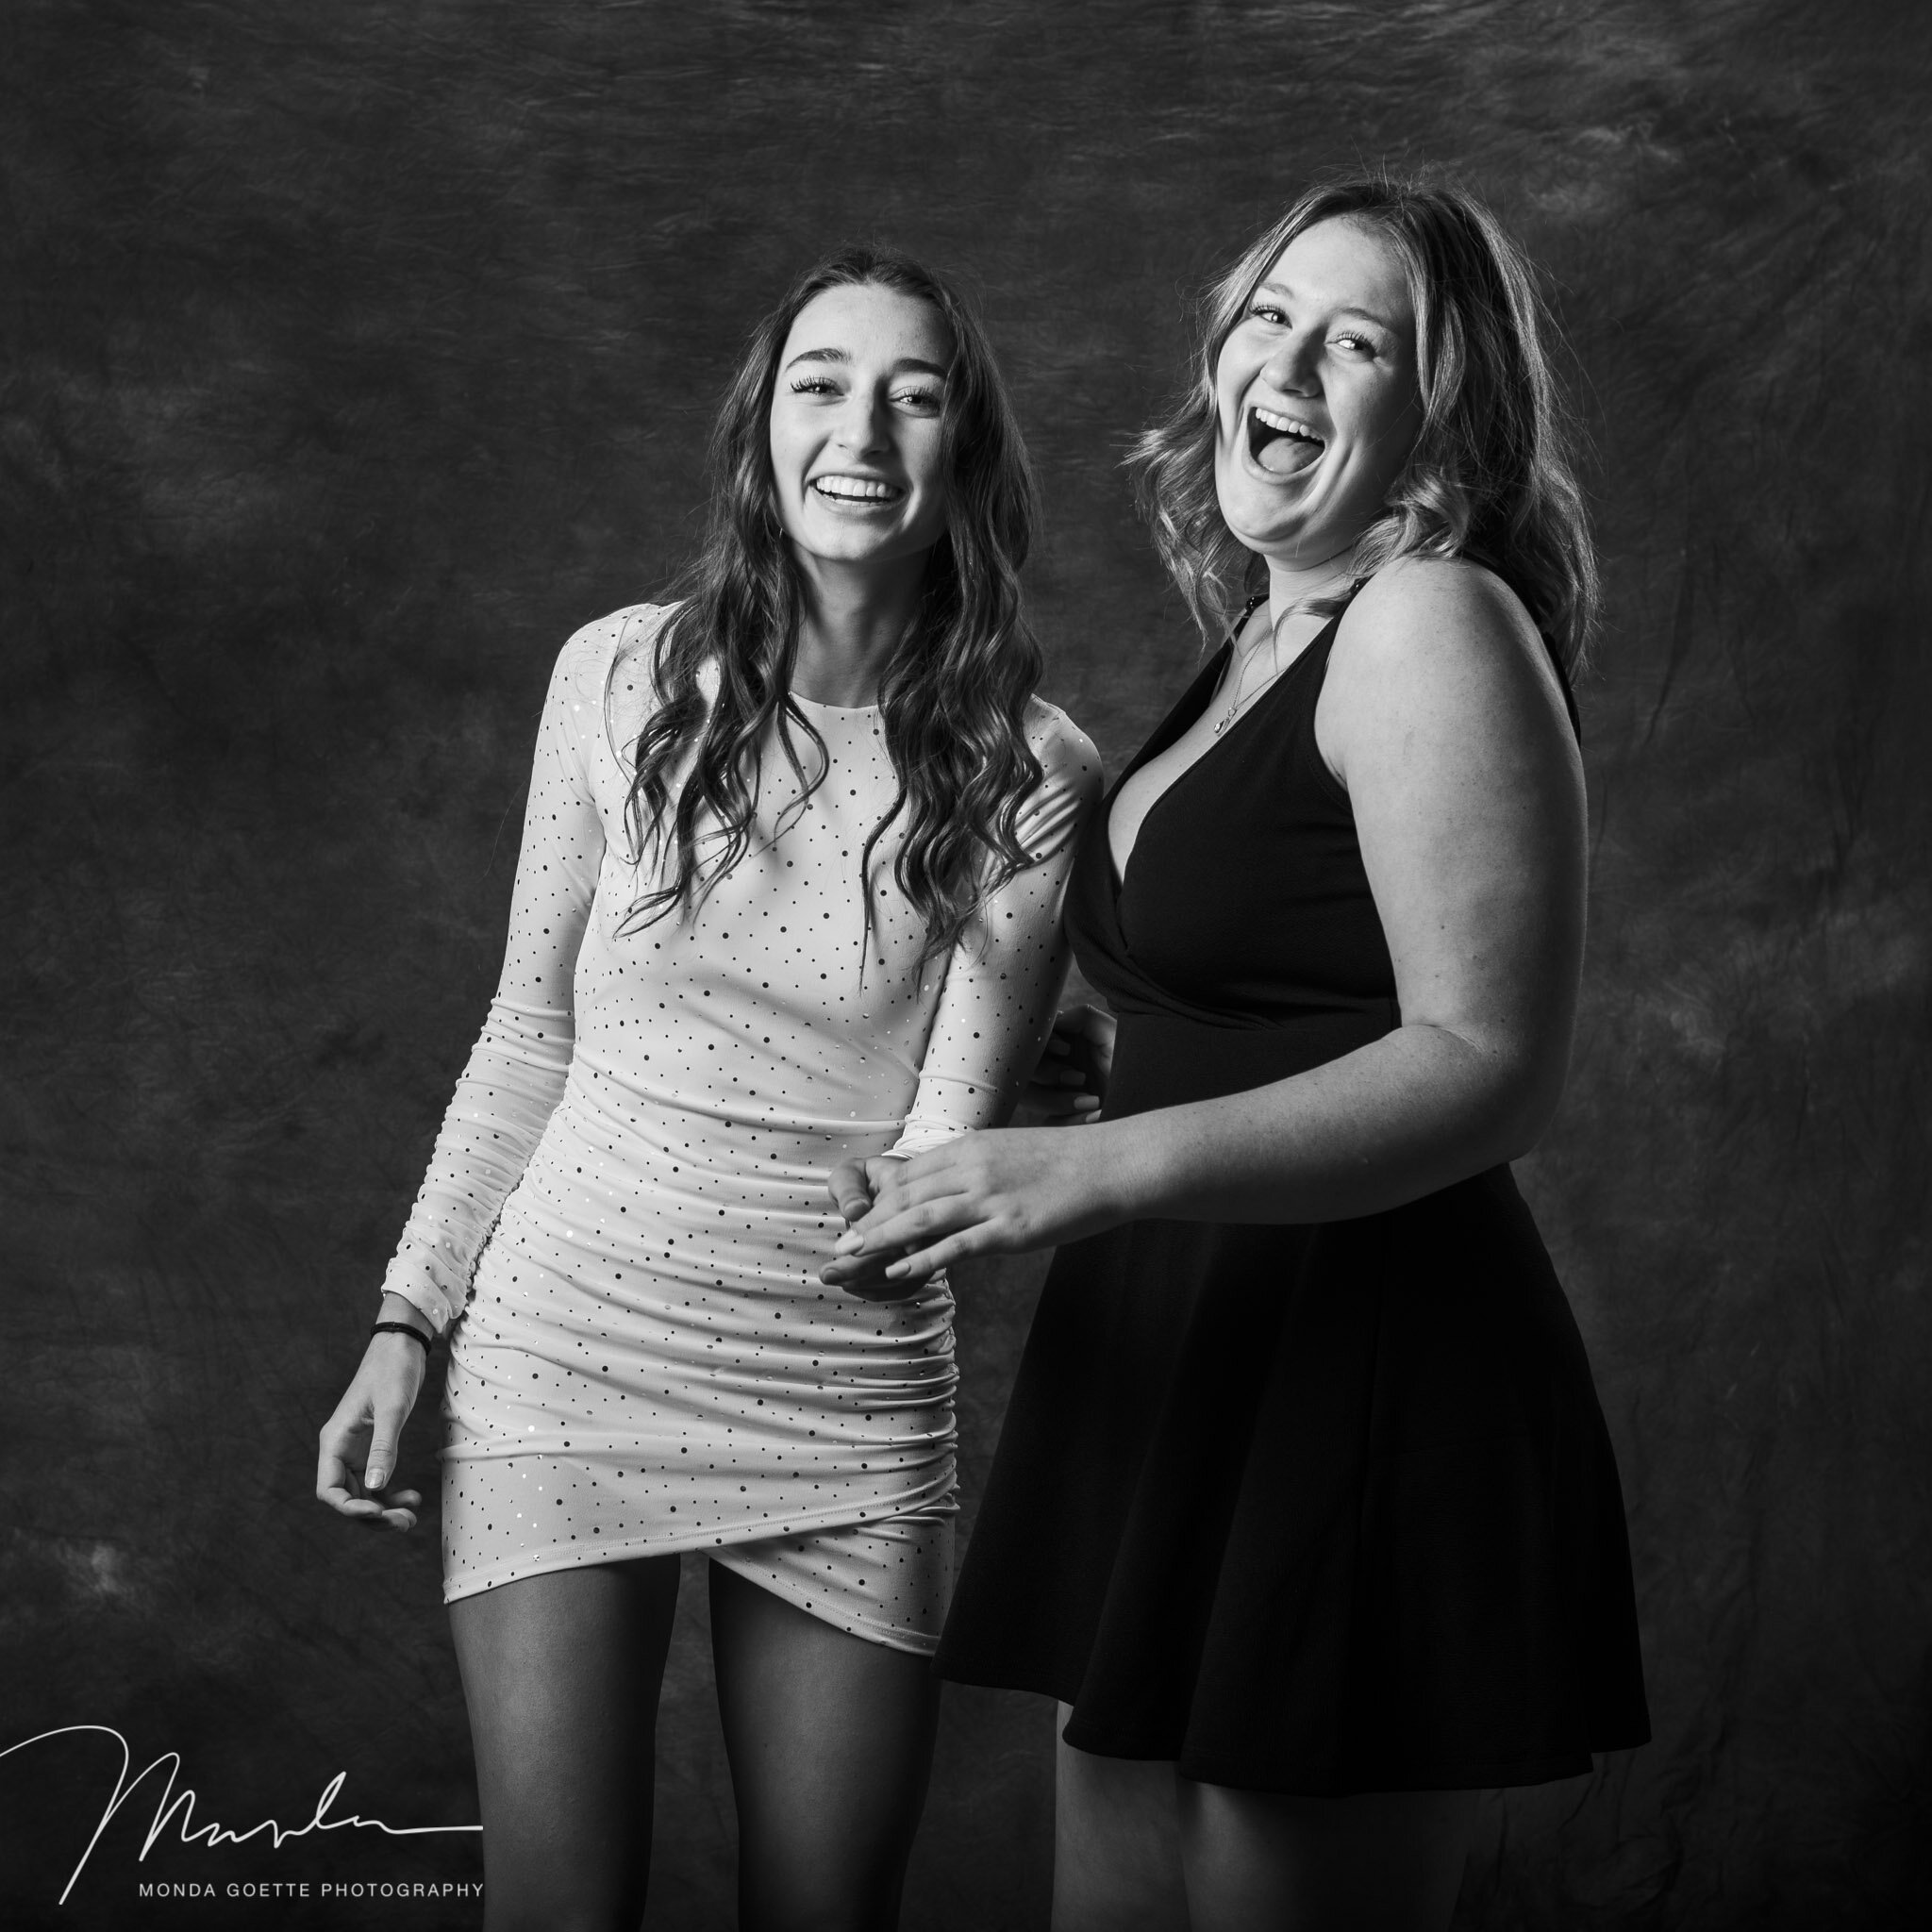 Two girls laughing during photo session at Mondafoto in St Paul, MN